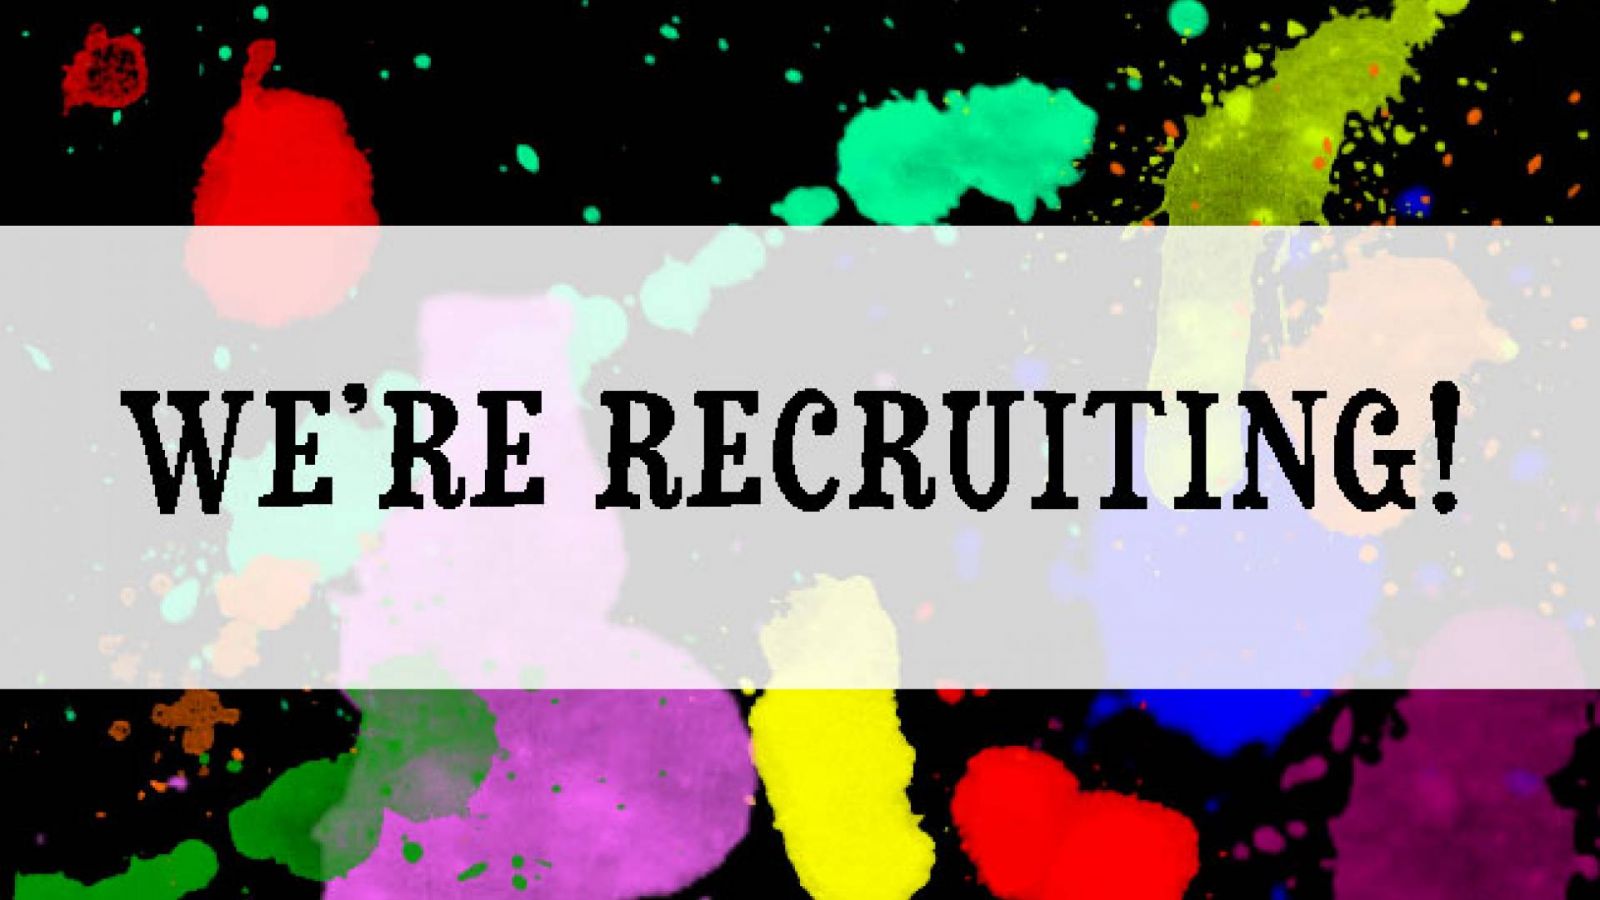 JaME is Recruiting! © JaME - Brushes by Maria Warnes